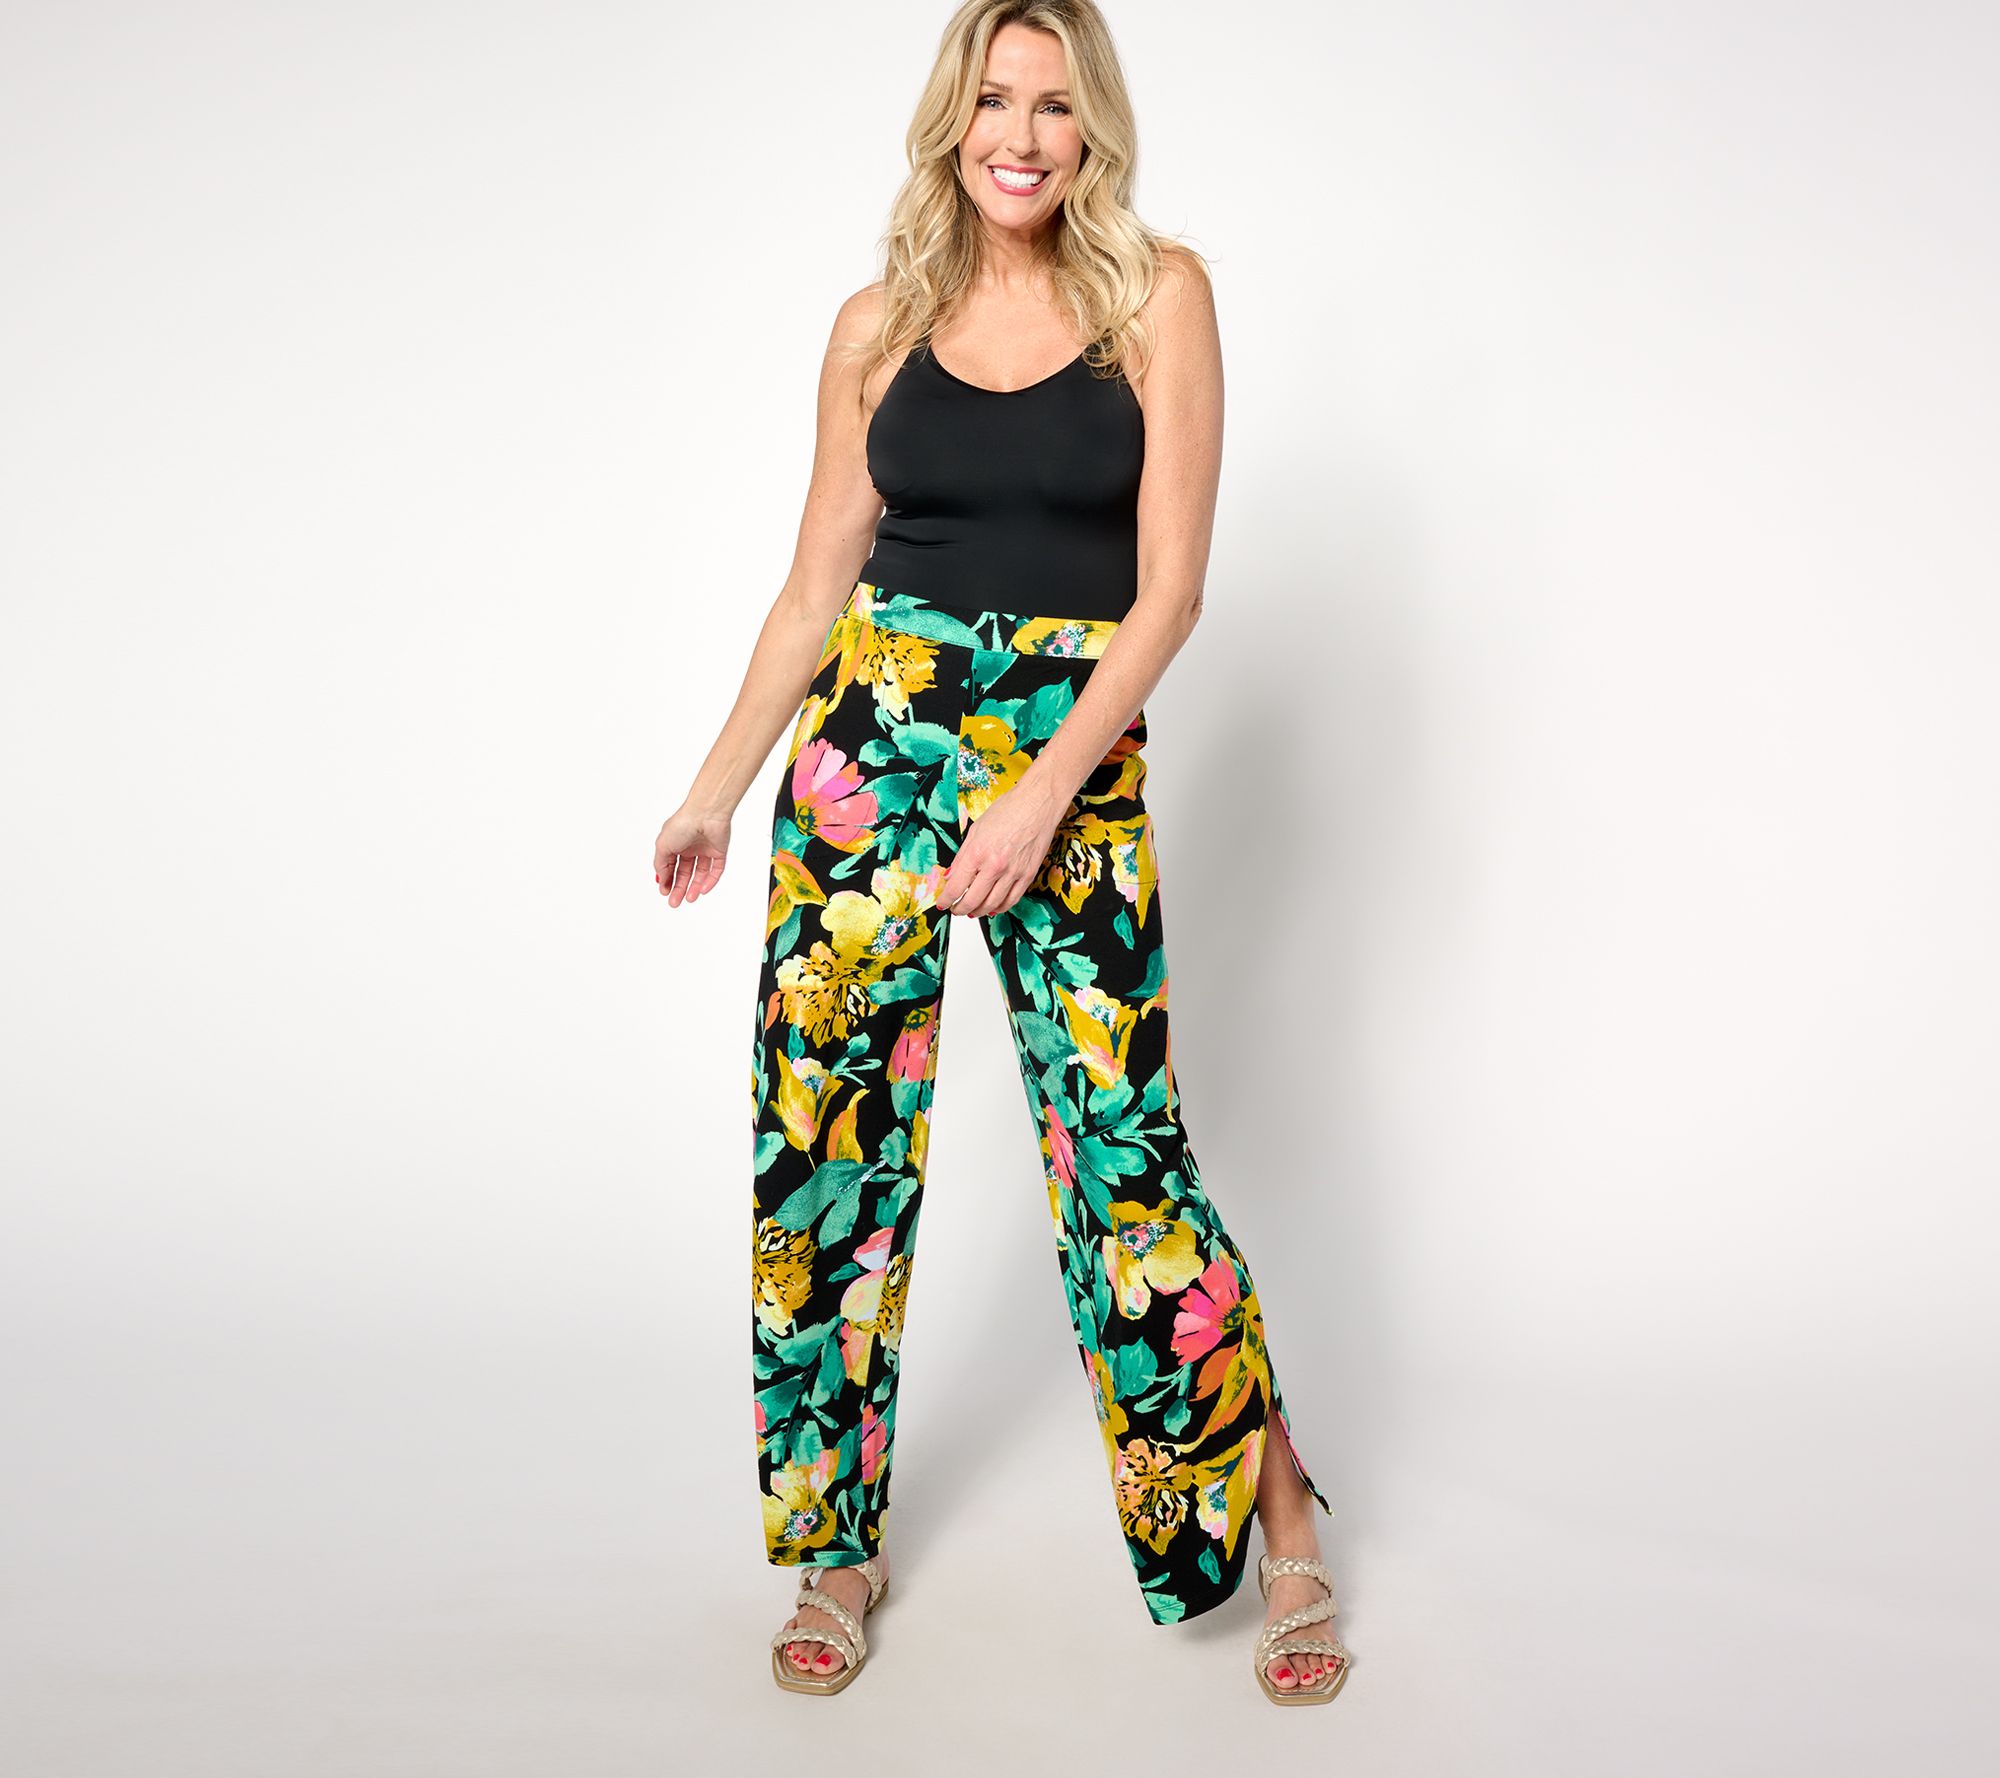 How to Style Palazzo Pants Your Own Special Way - YOUR TRUE SELF BLOG